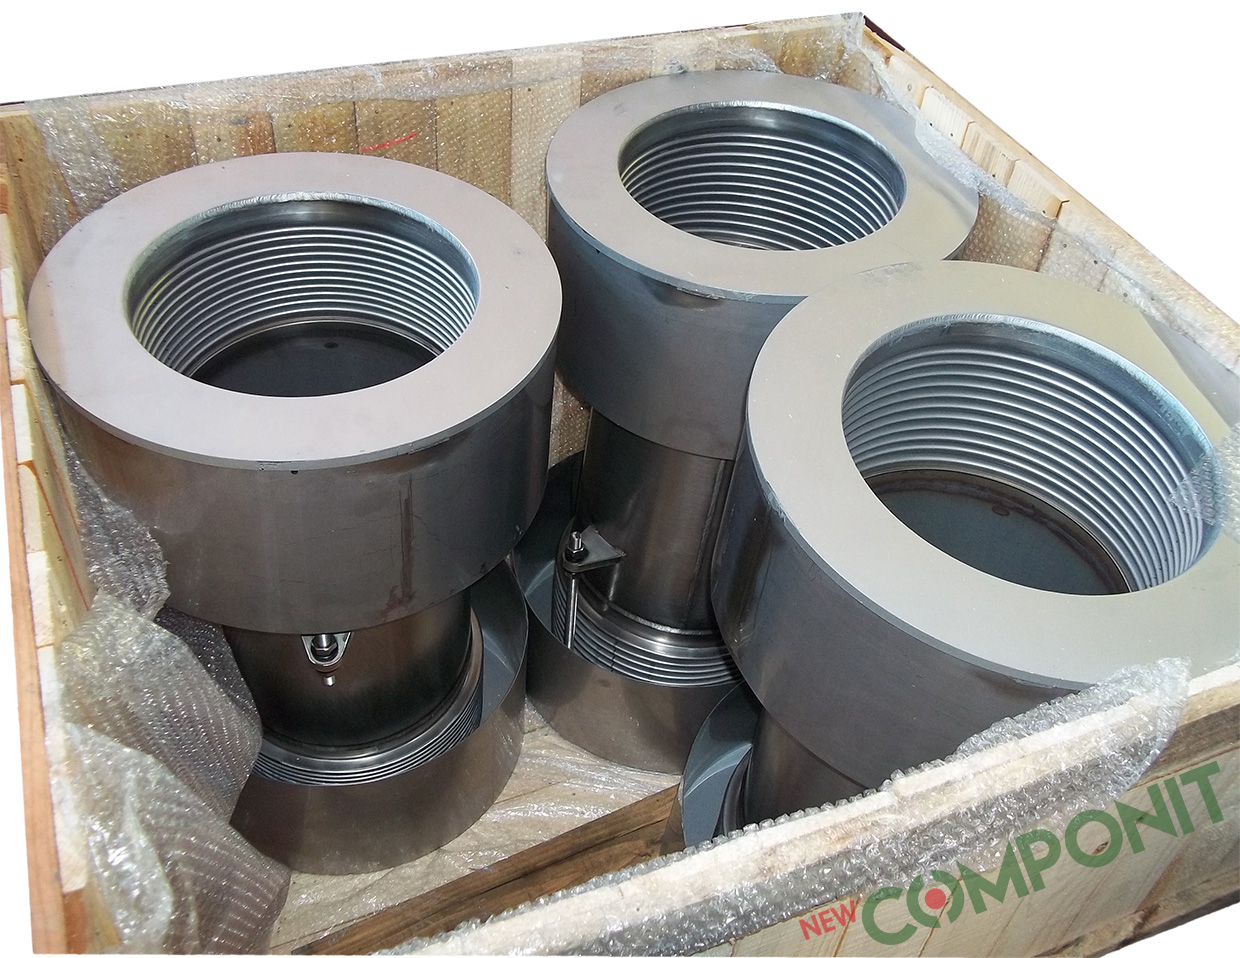 NewComponit | Expansion Joint